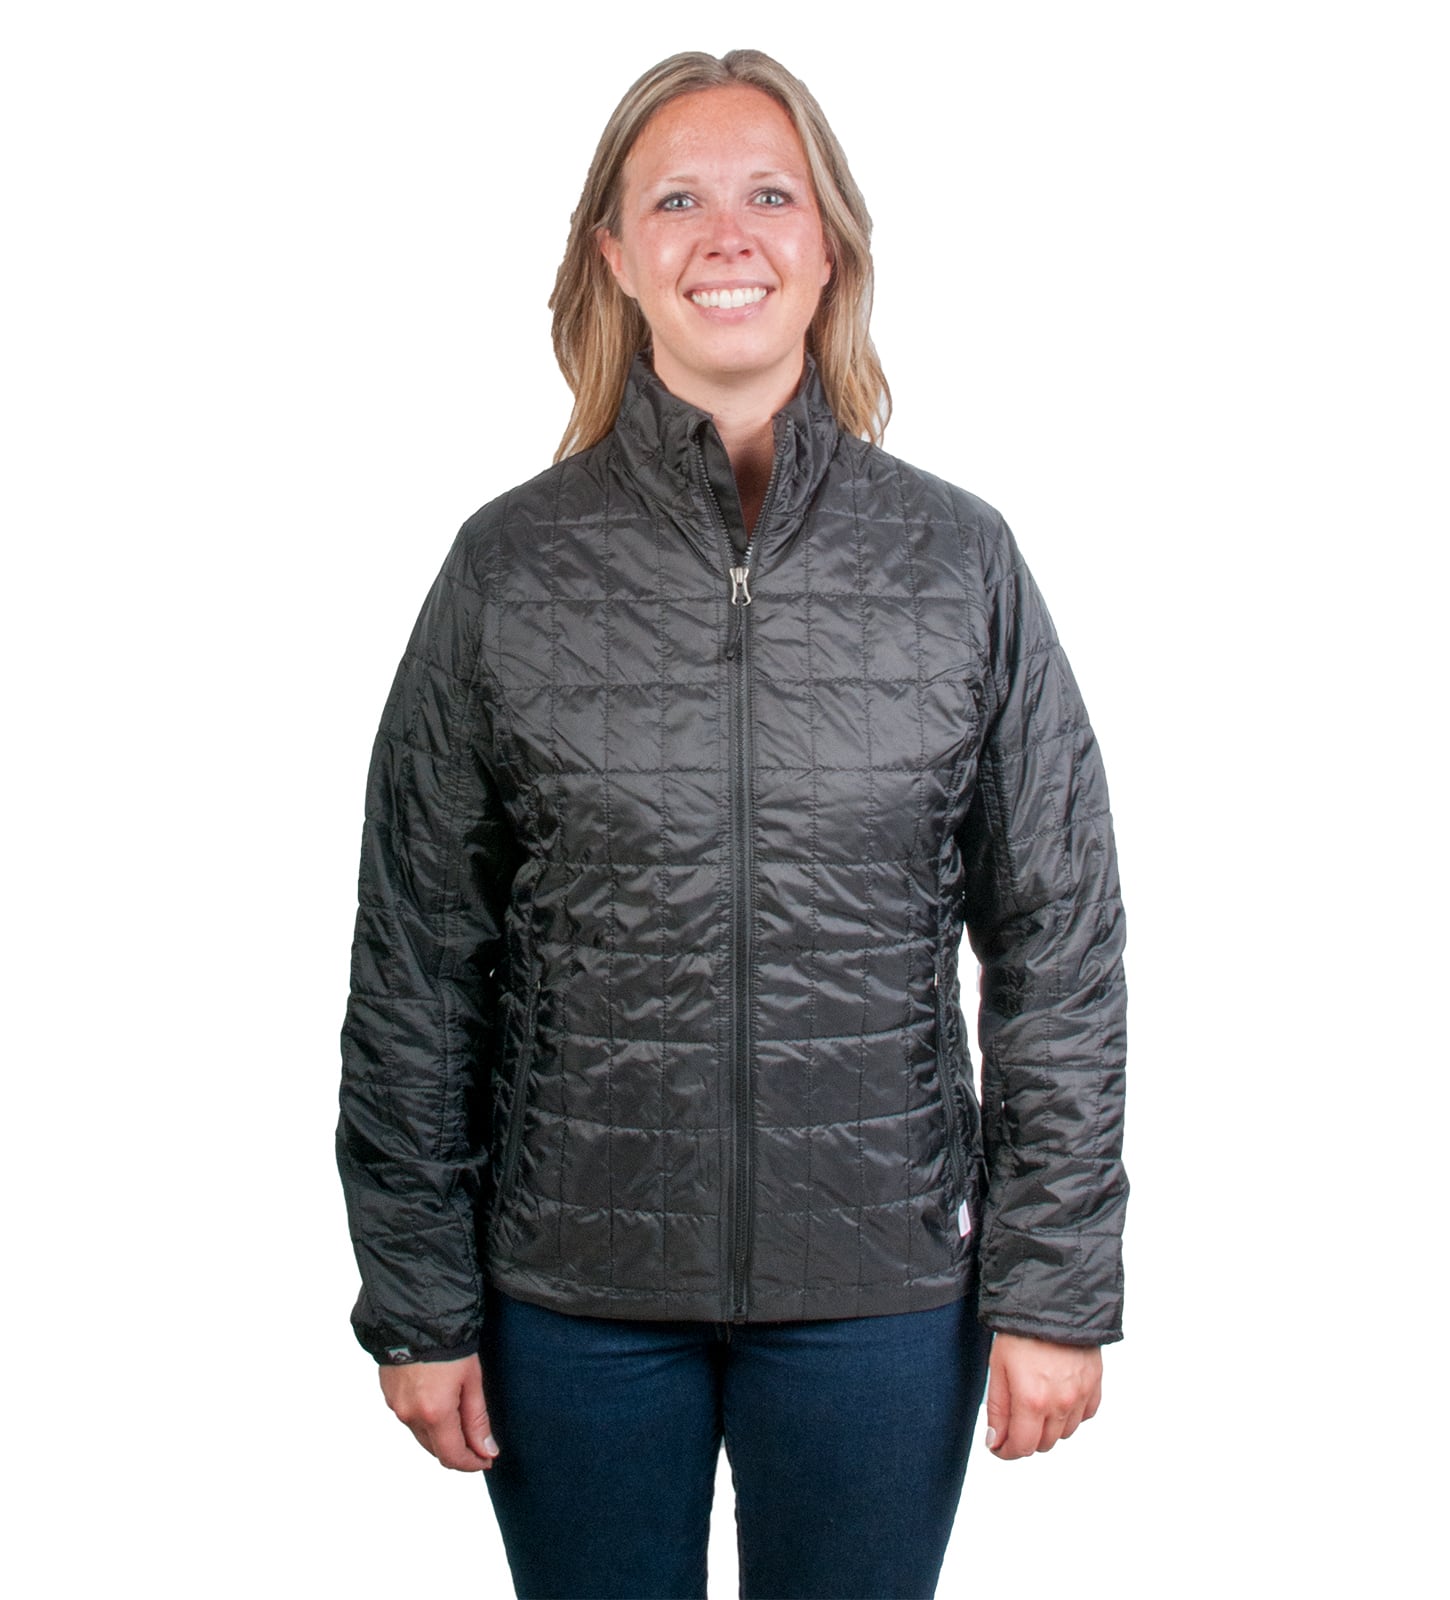 Women's Traveler Insulated Packable Vest - Glossy Finish – Storm Creek